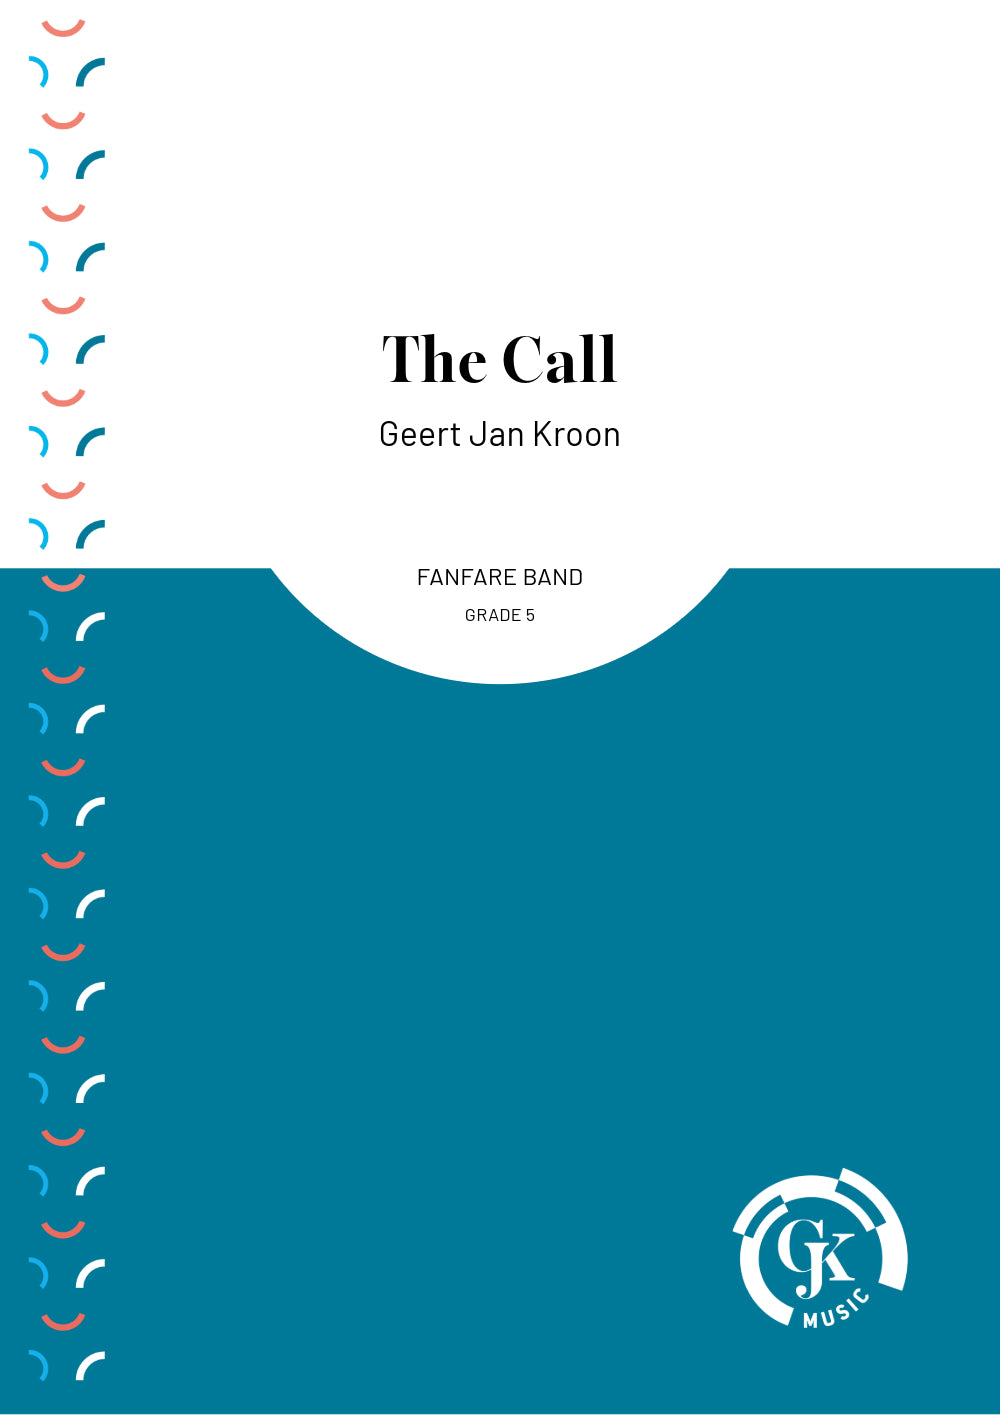 The Call - Fanfare